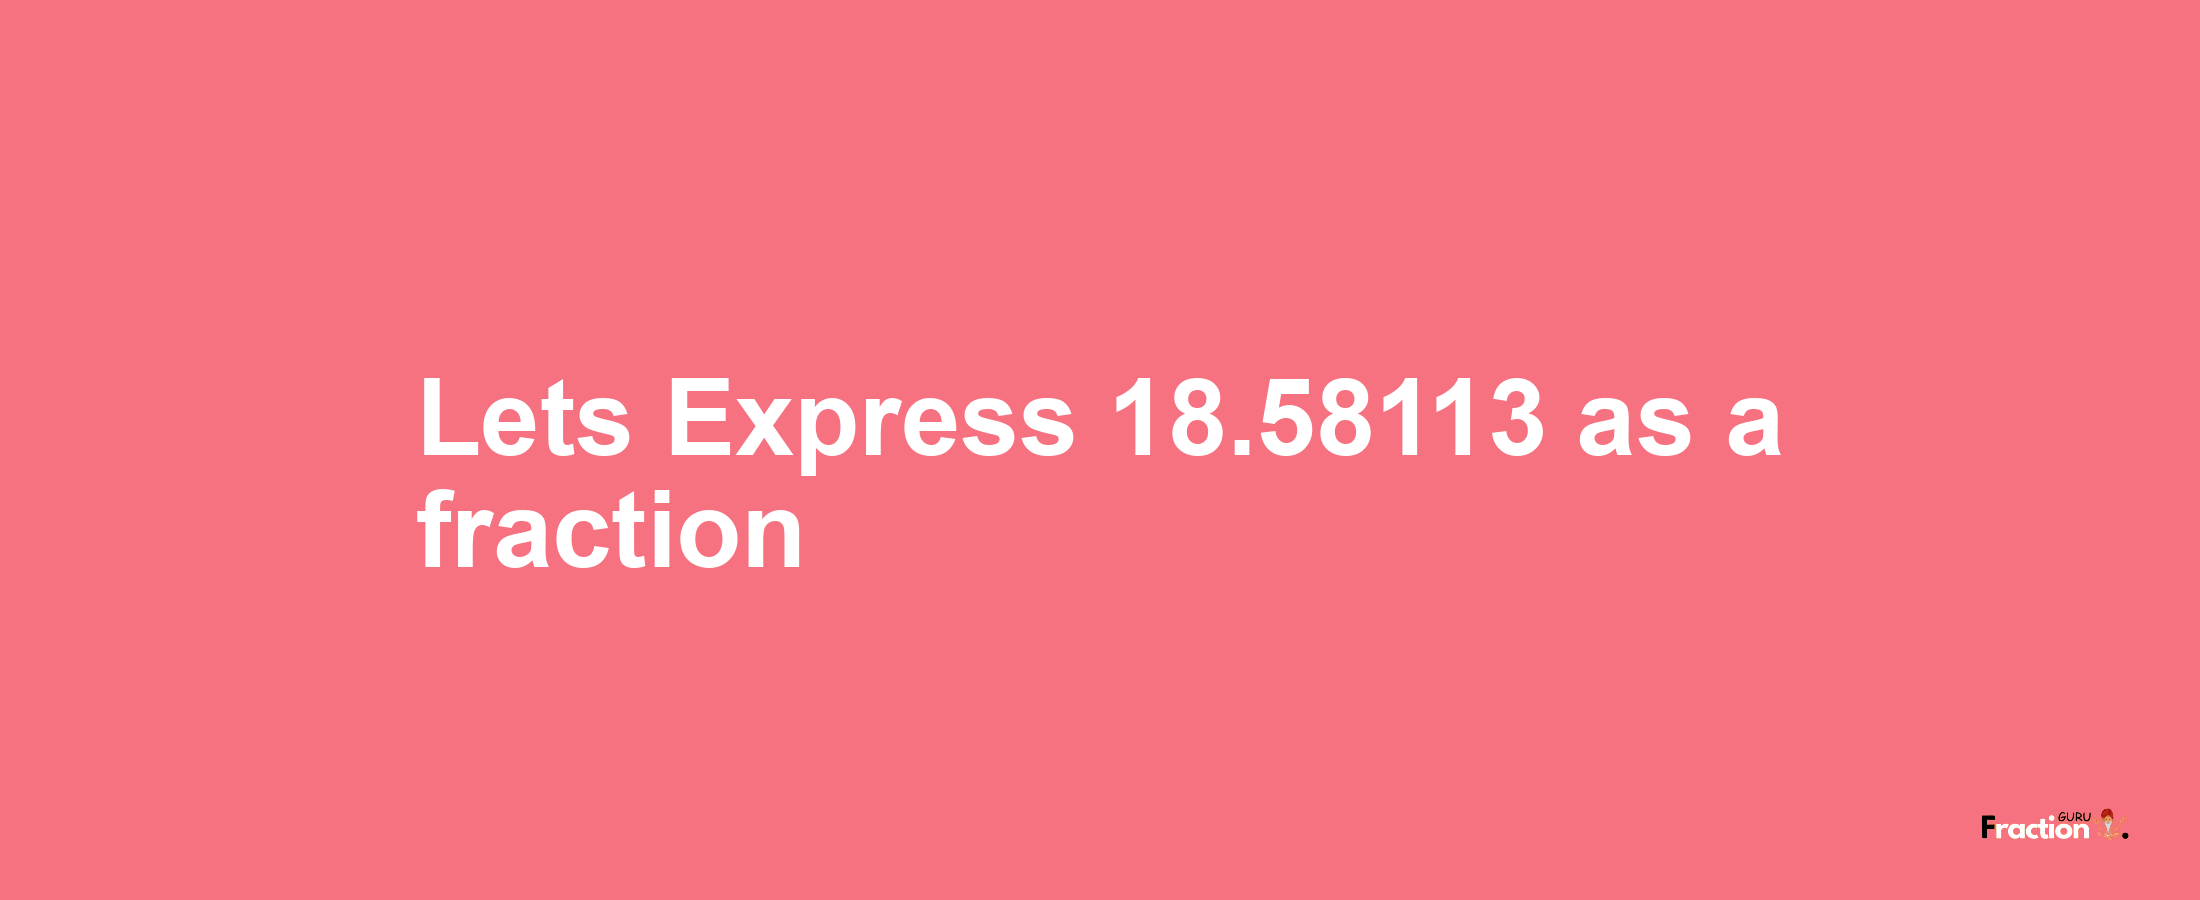 Lets Express 18.58113 as afraction